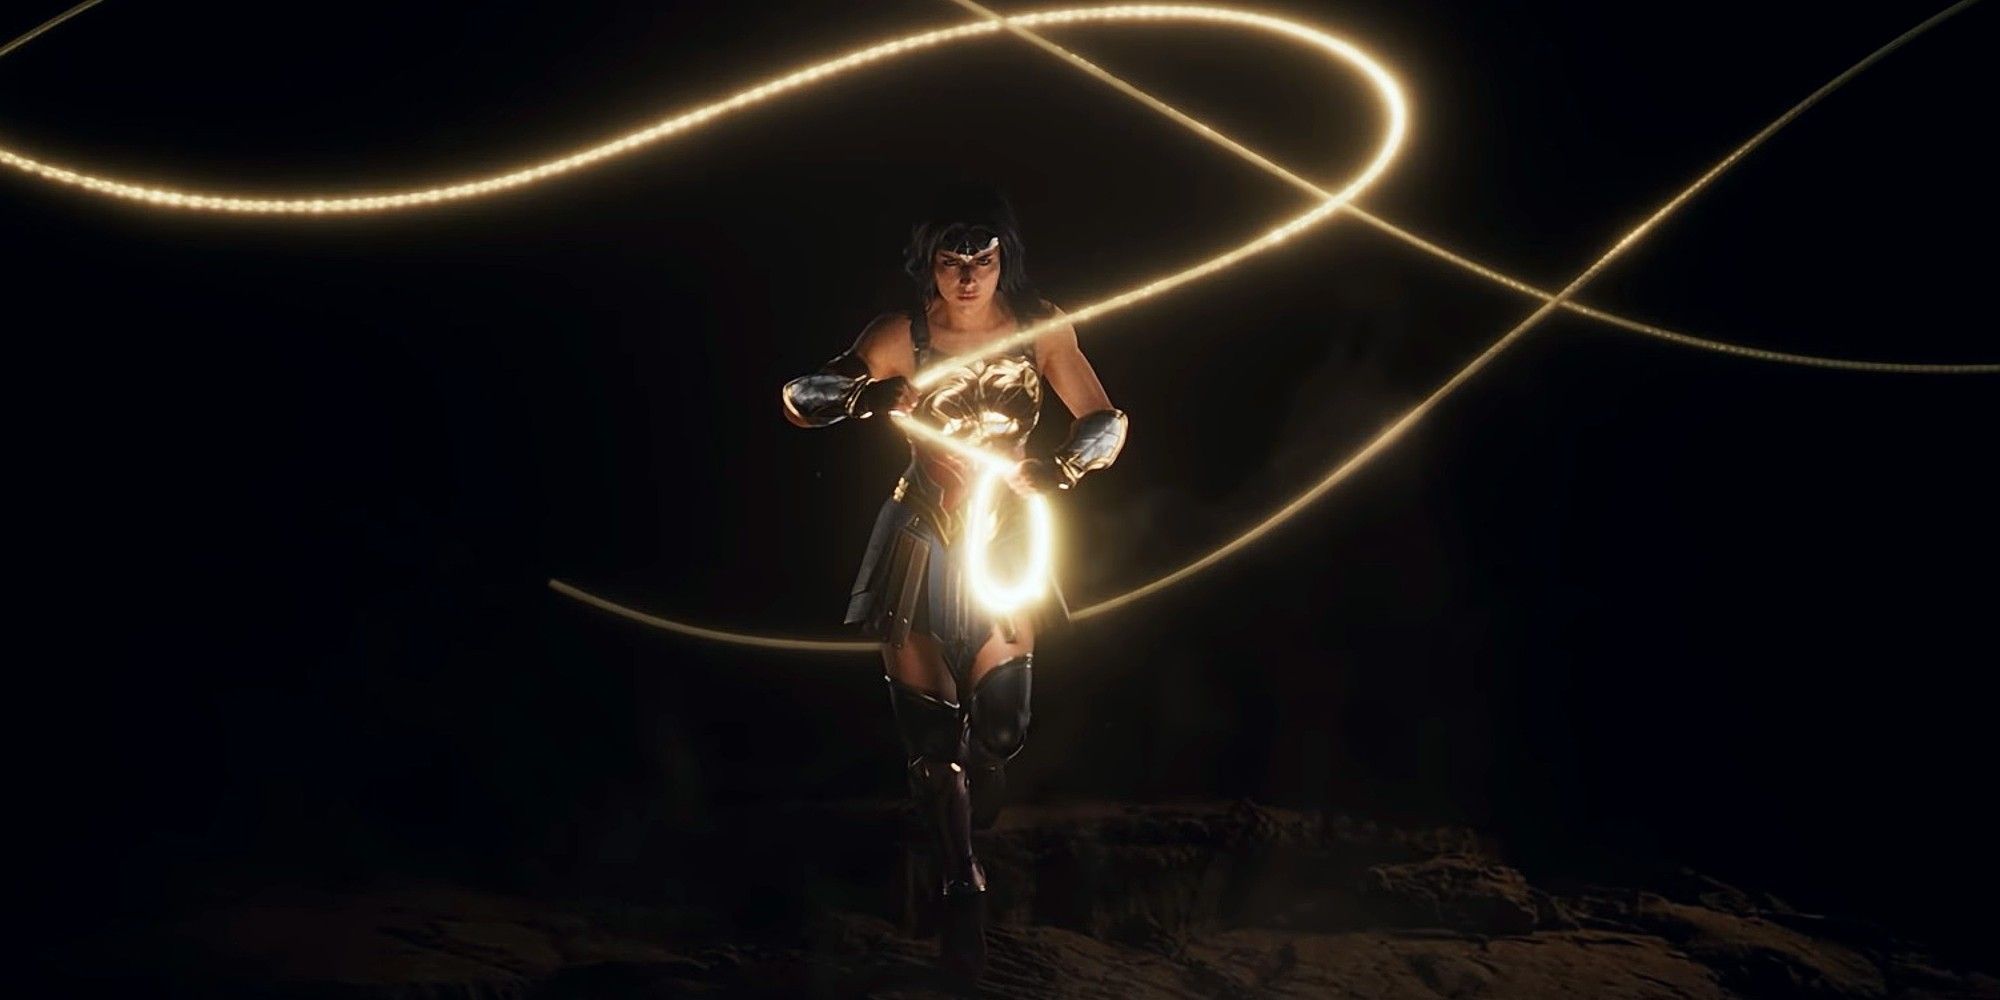 Job Advert Suggests Monolith's Wonder Woman To Feature Procedural Storytelling